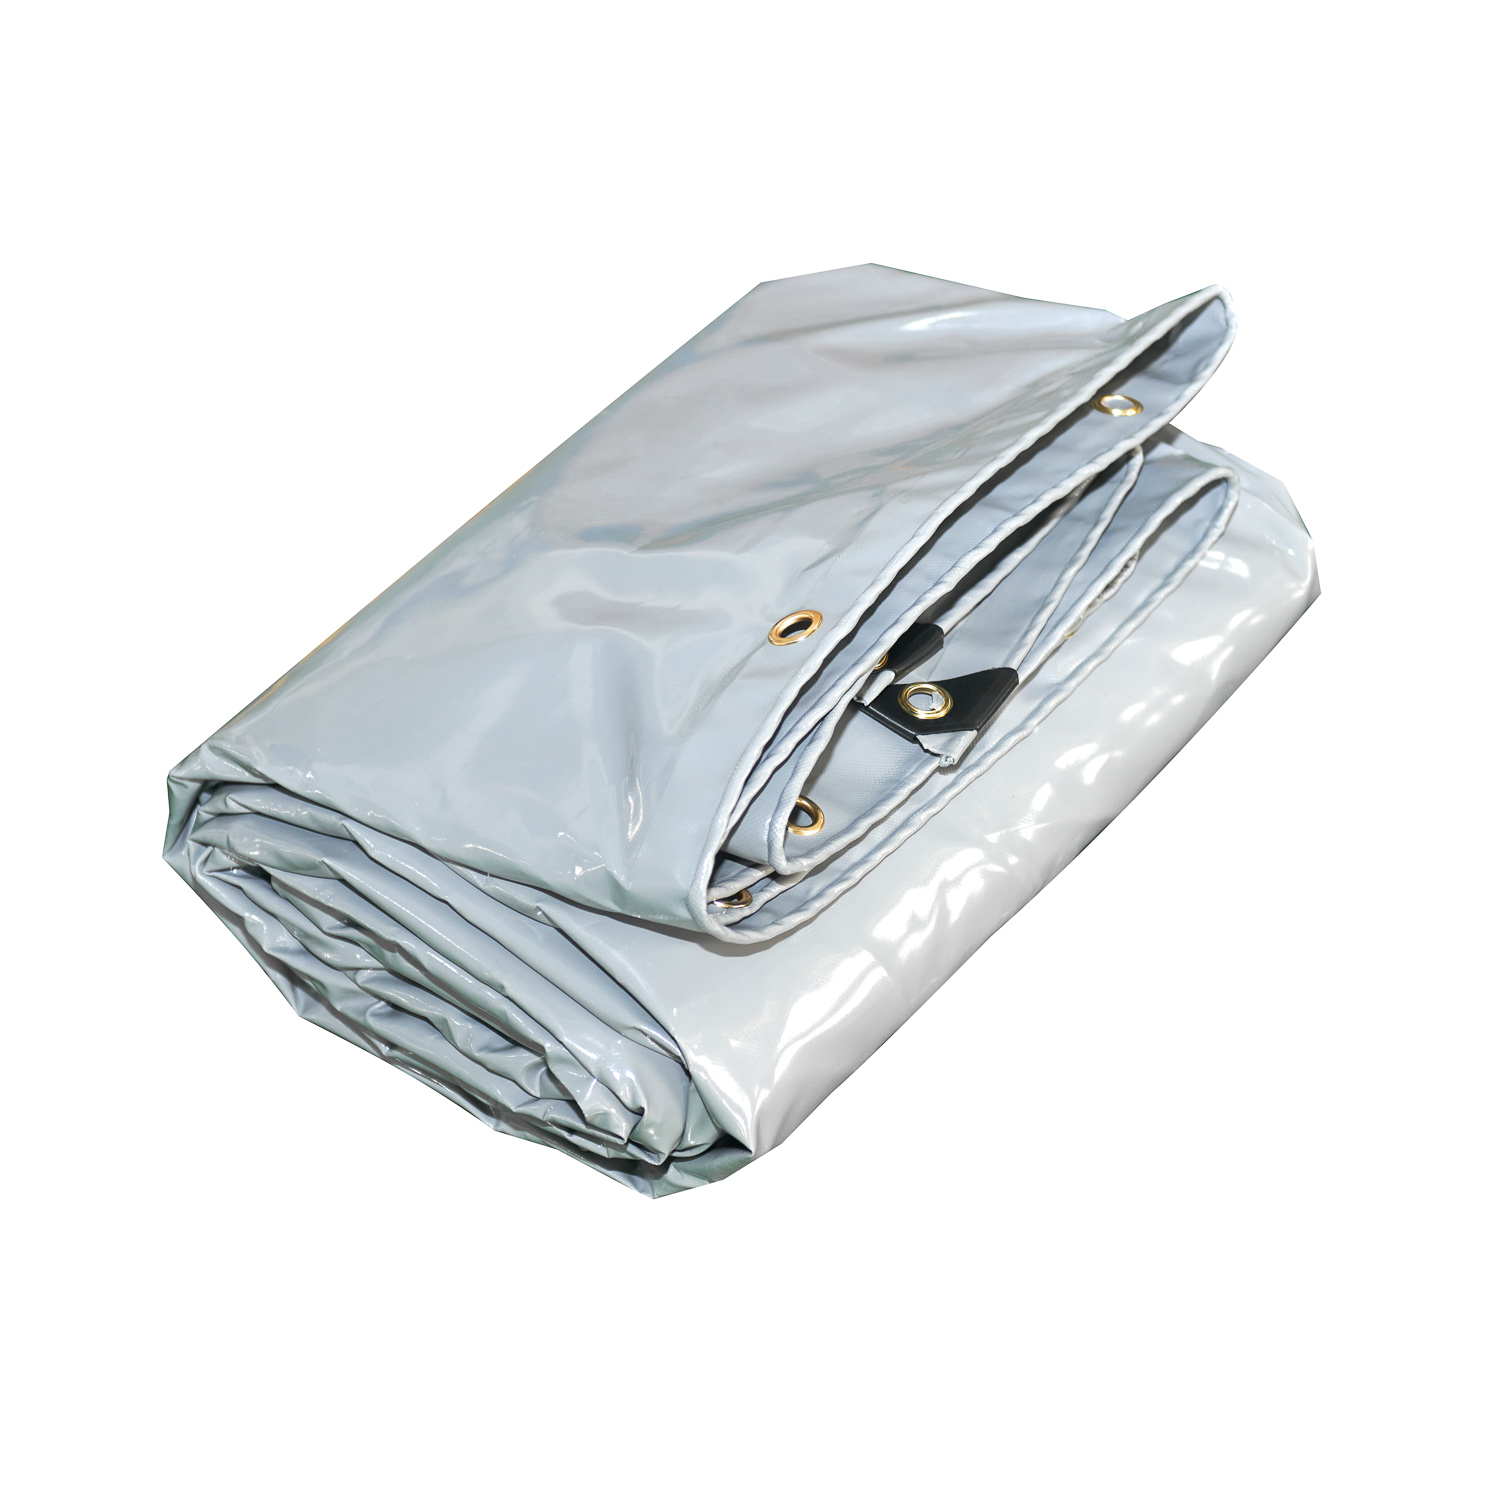 850gsm Heavy-duty Blackout PVC Coated Tarpaulin Roll for Truck Cover Tent with Lower Price 